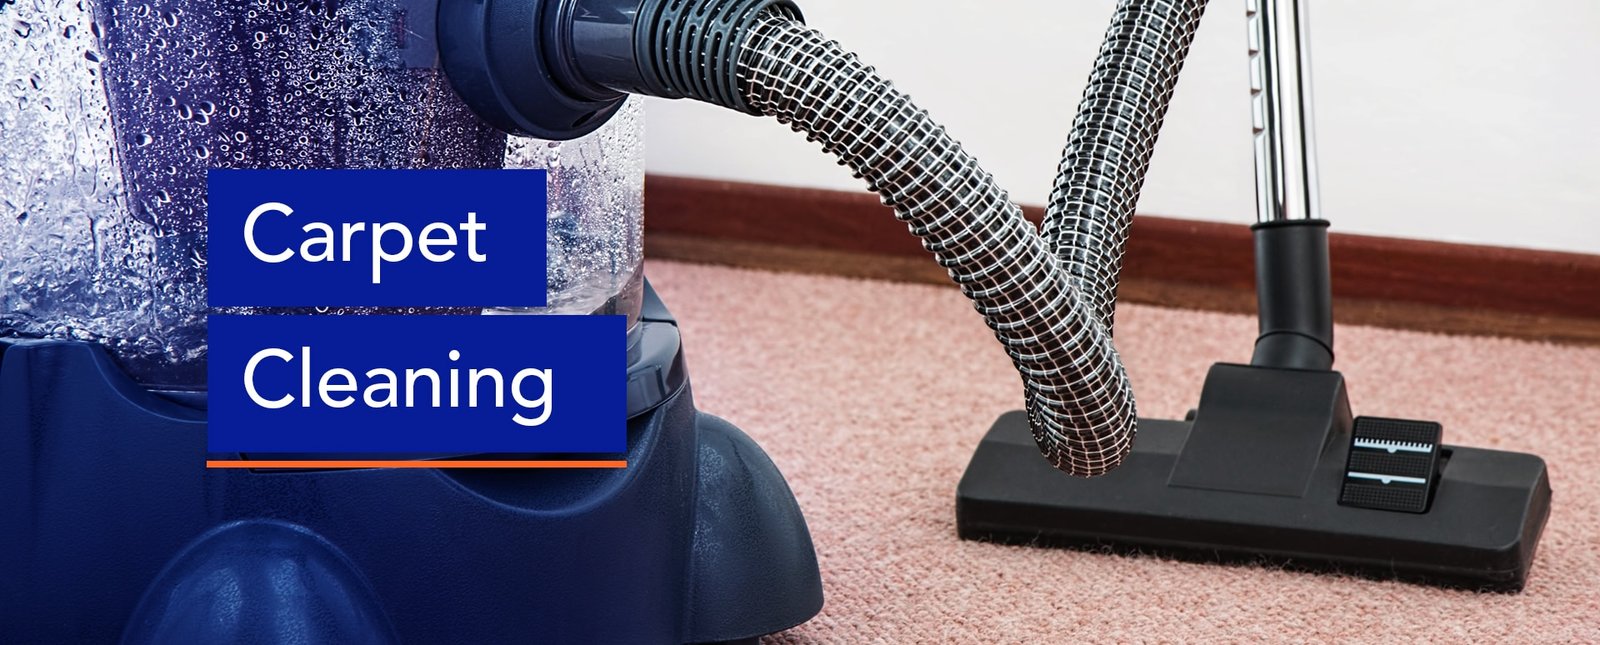 Fresh and clean carpet best option to move with carpet cleaning Adelaide